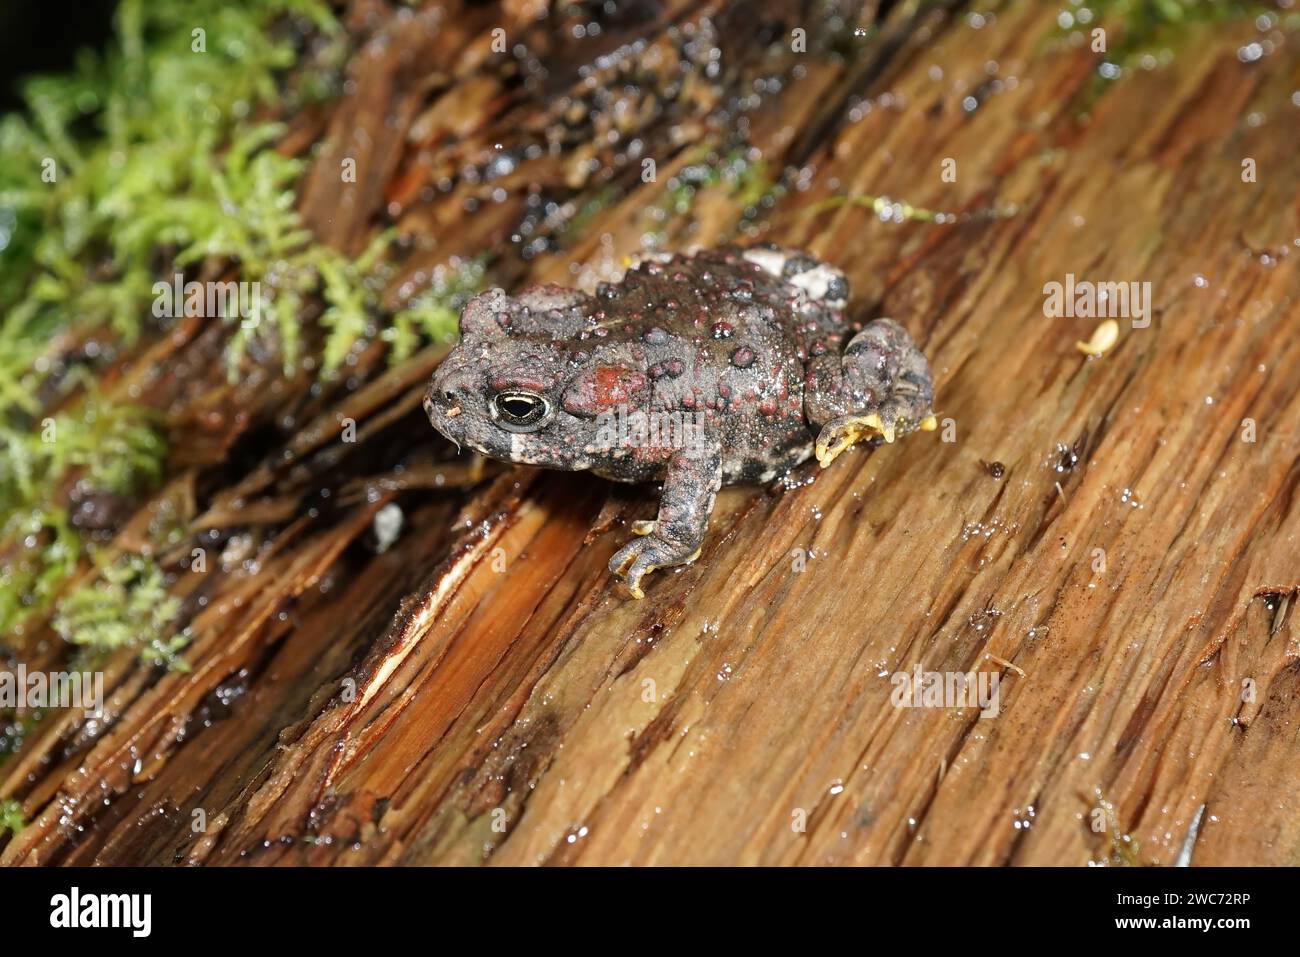 Natural close up on a juvenile Western toad, Anaxyrus boreas, sitting on the forest floor Stock Photo